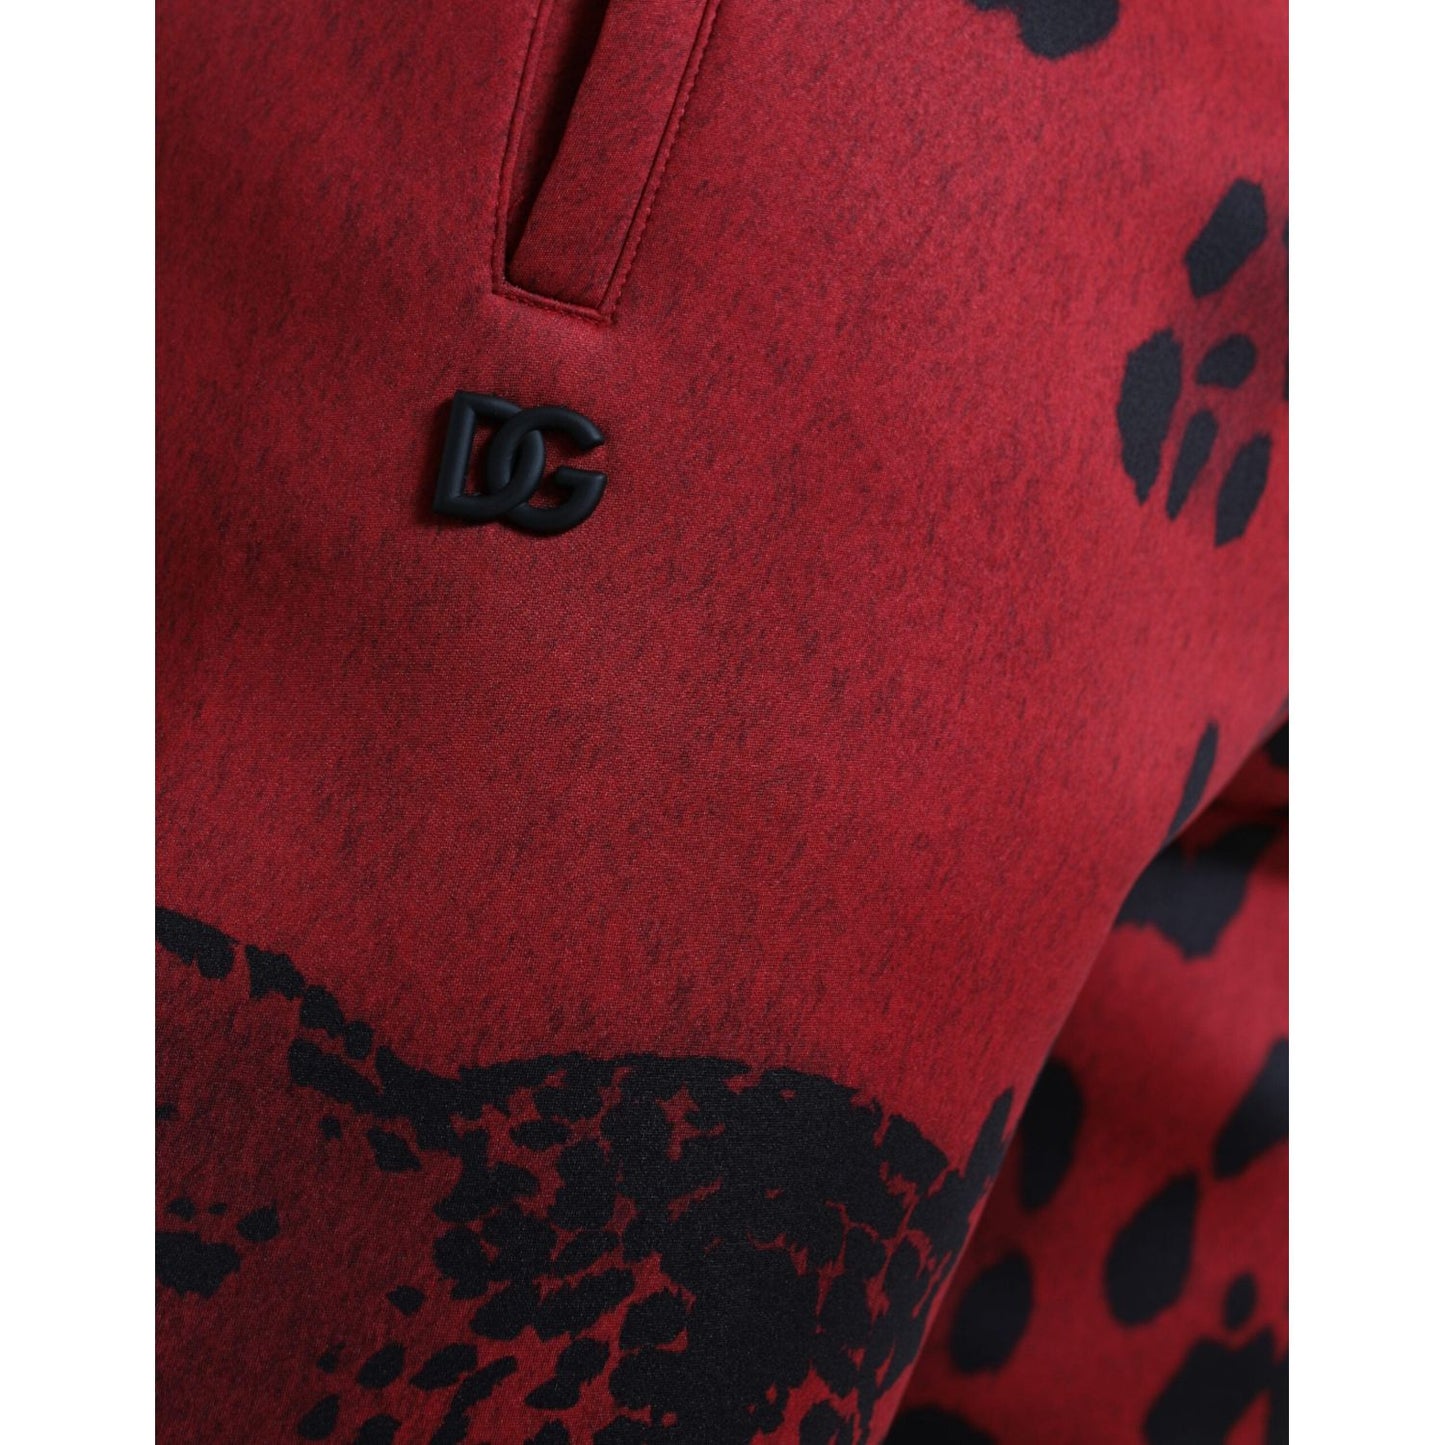 Dolce & Gabbana Elegant Leopard Print Joggers in Red and Black red-black-leopard-stretch-jogger-pants